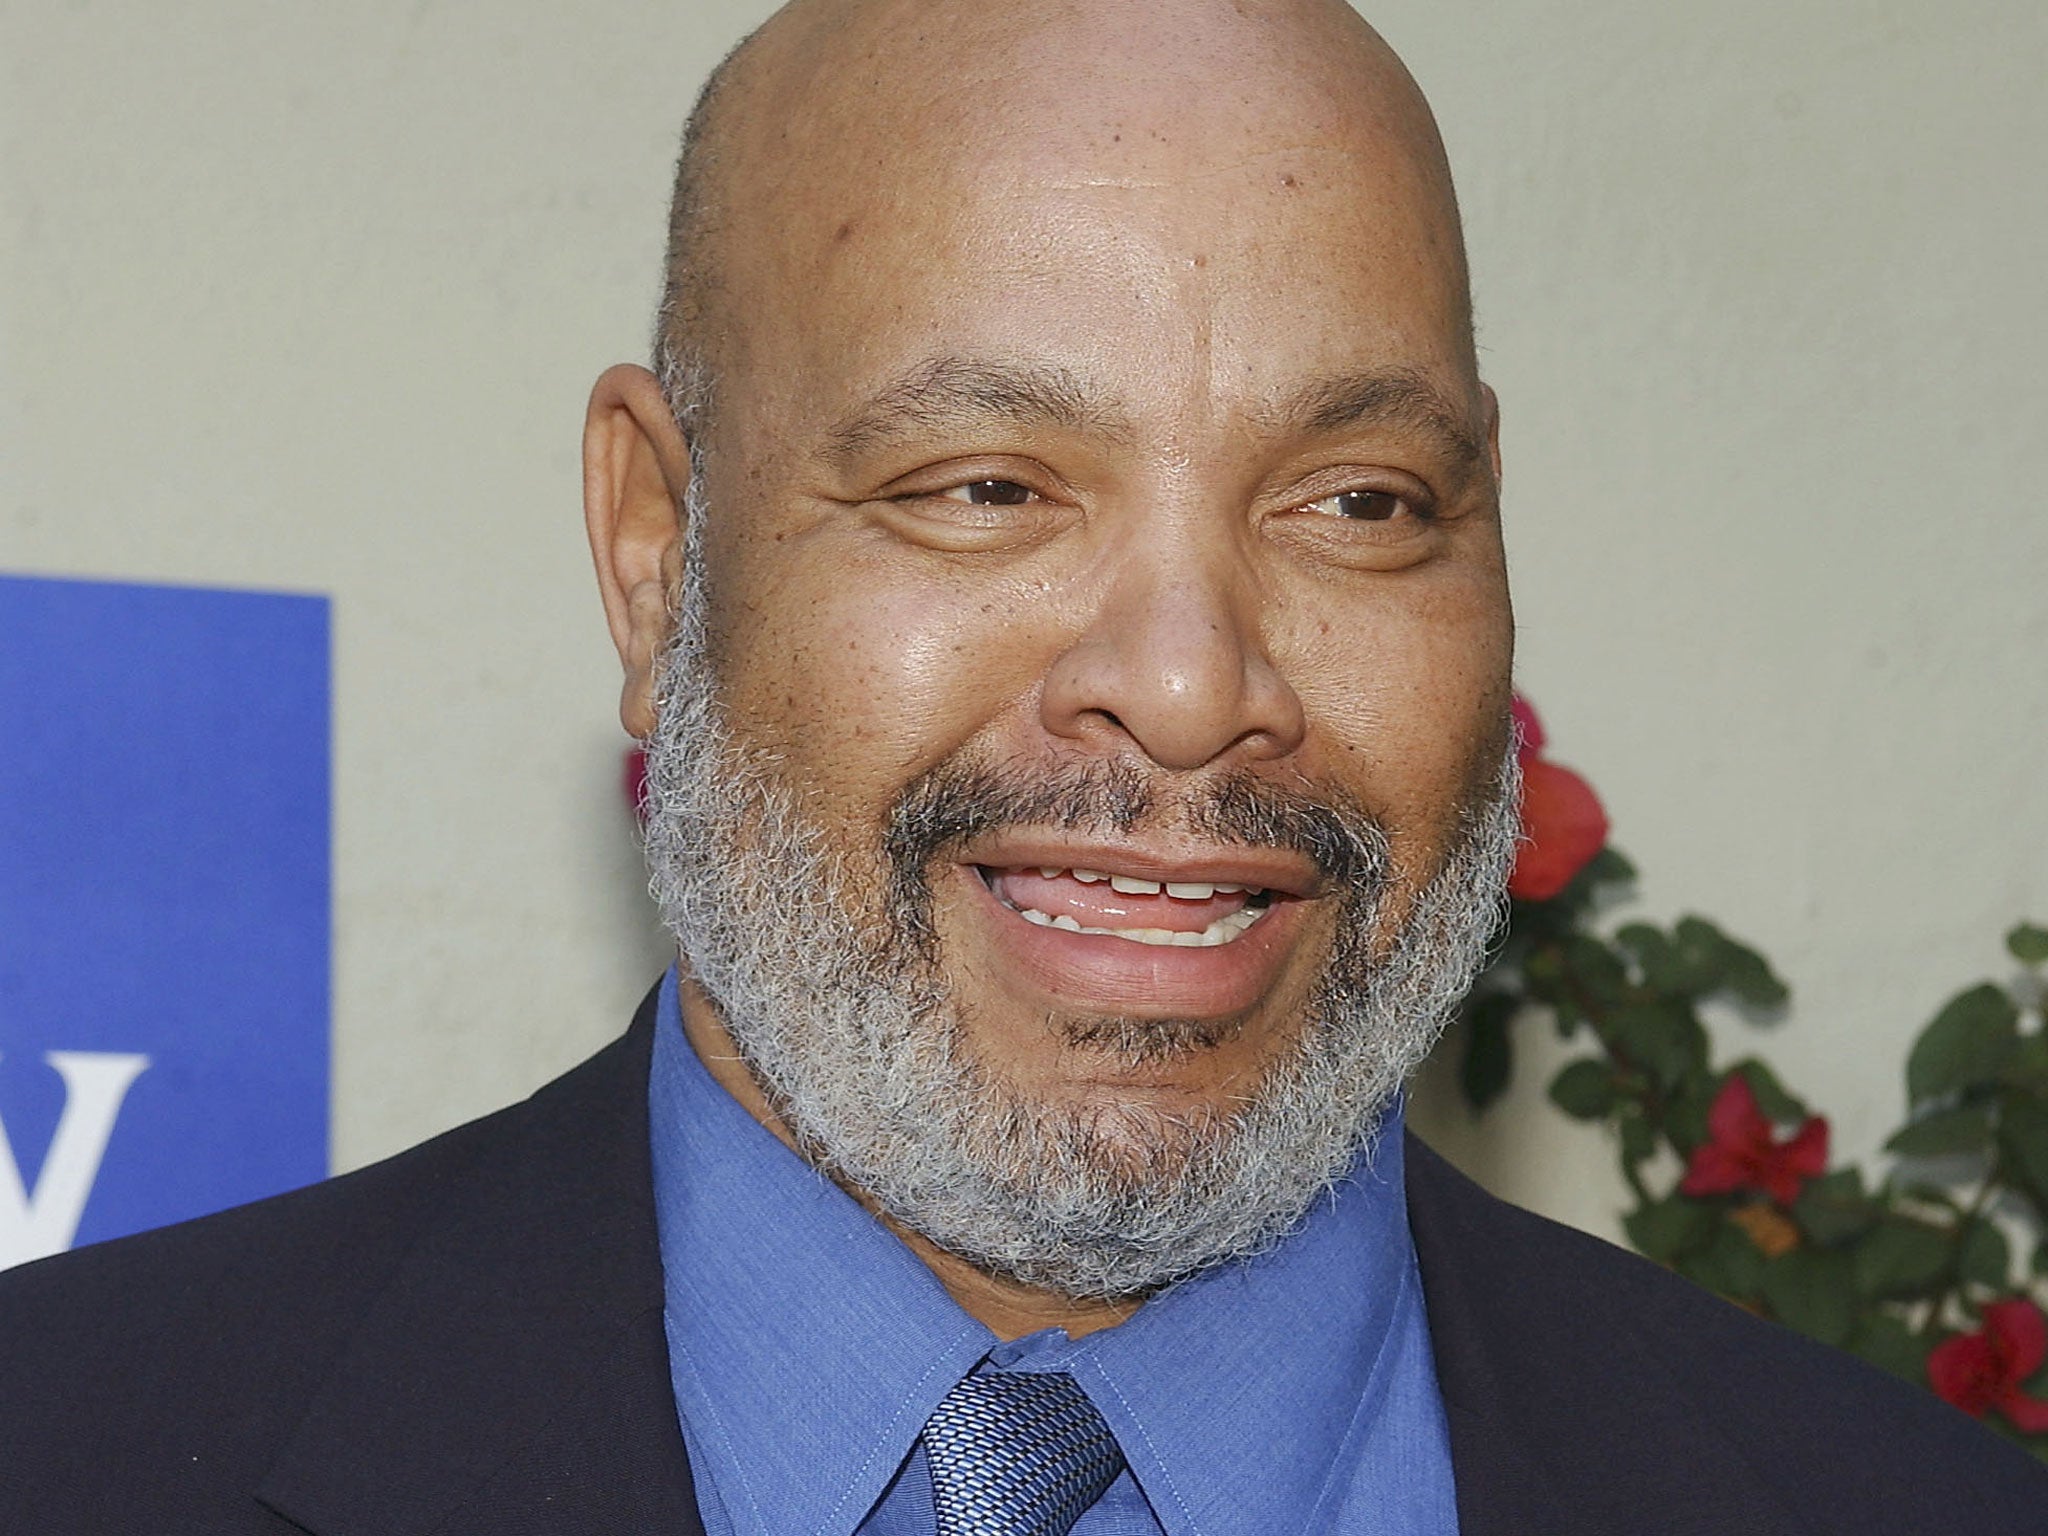 James Avery in 2004